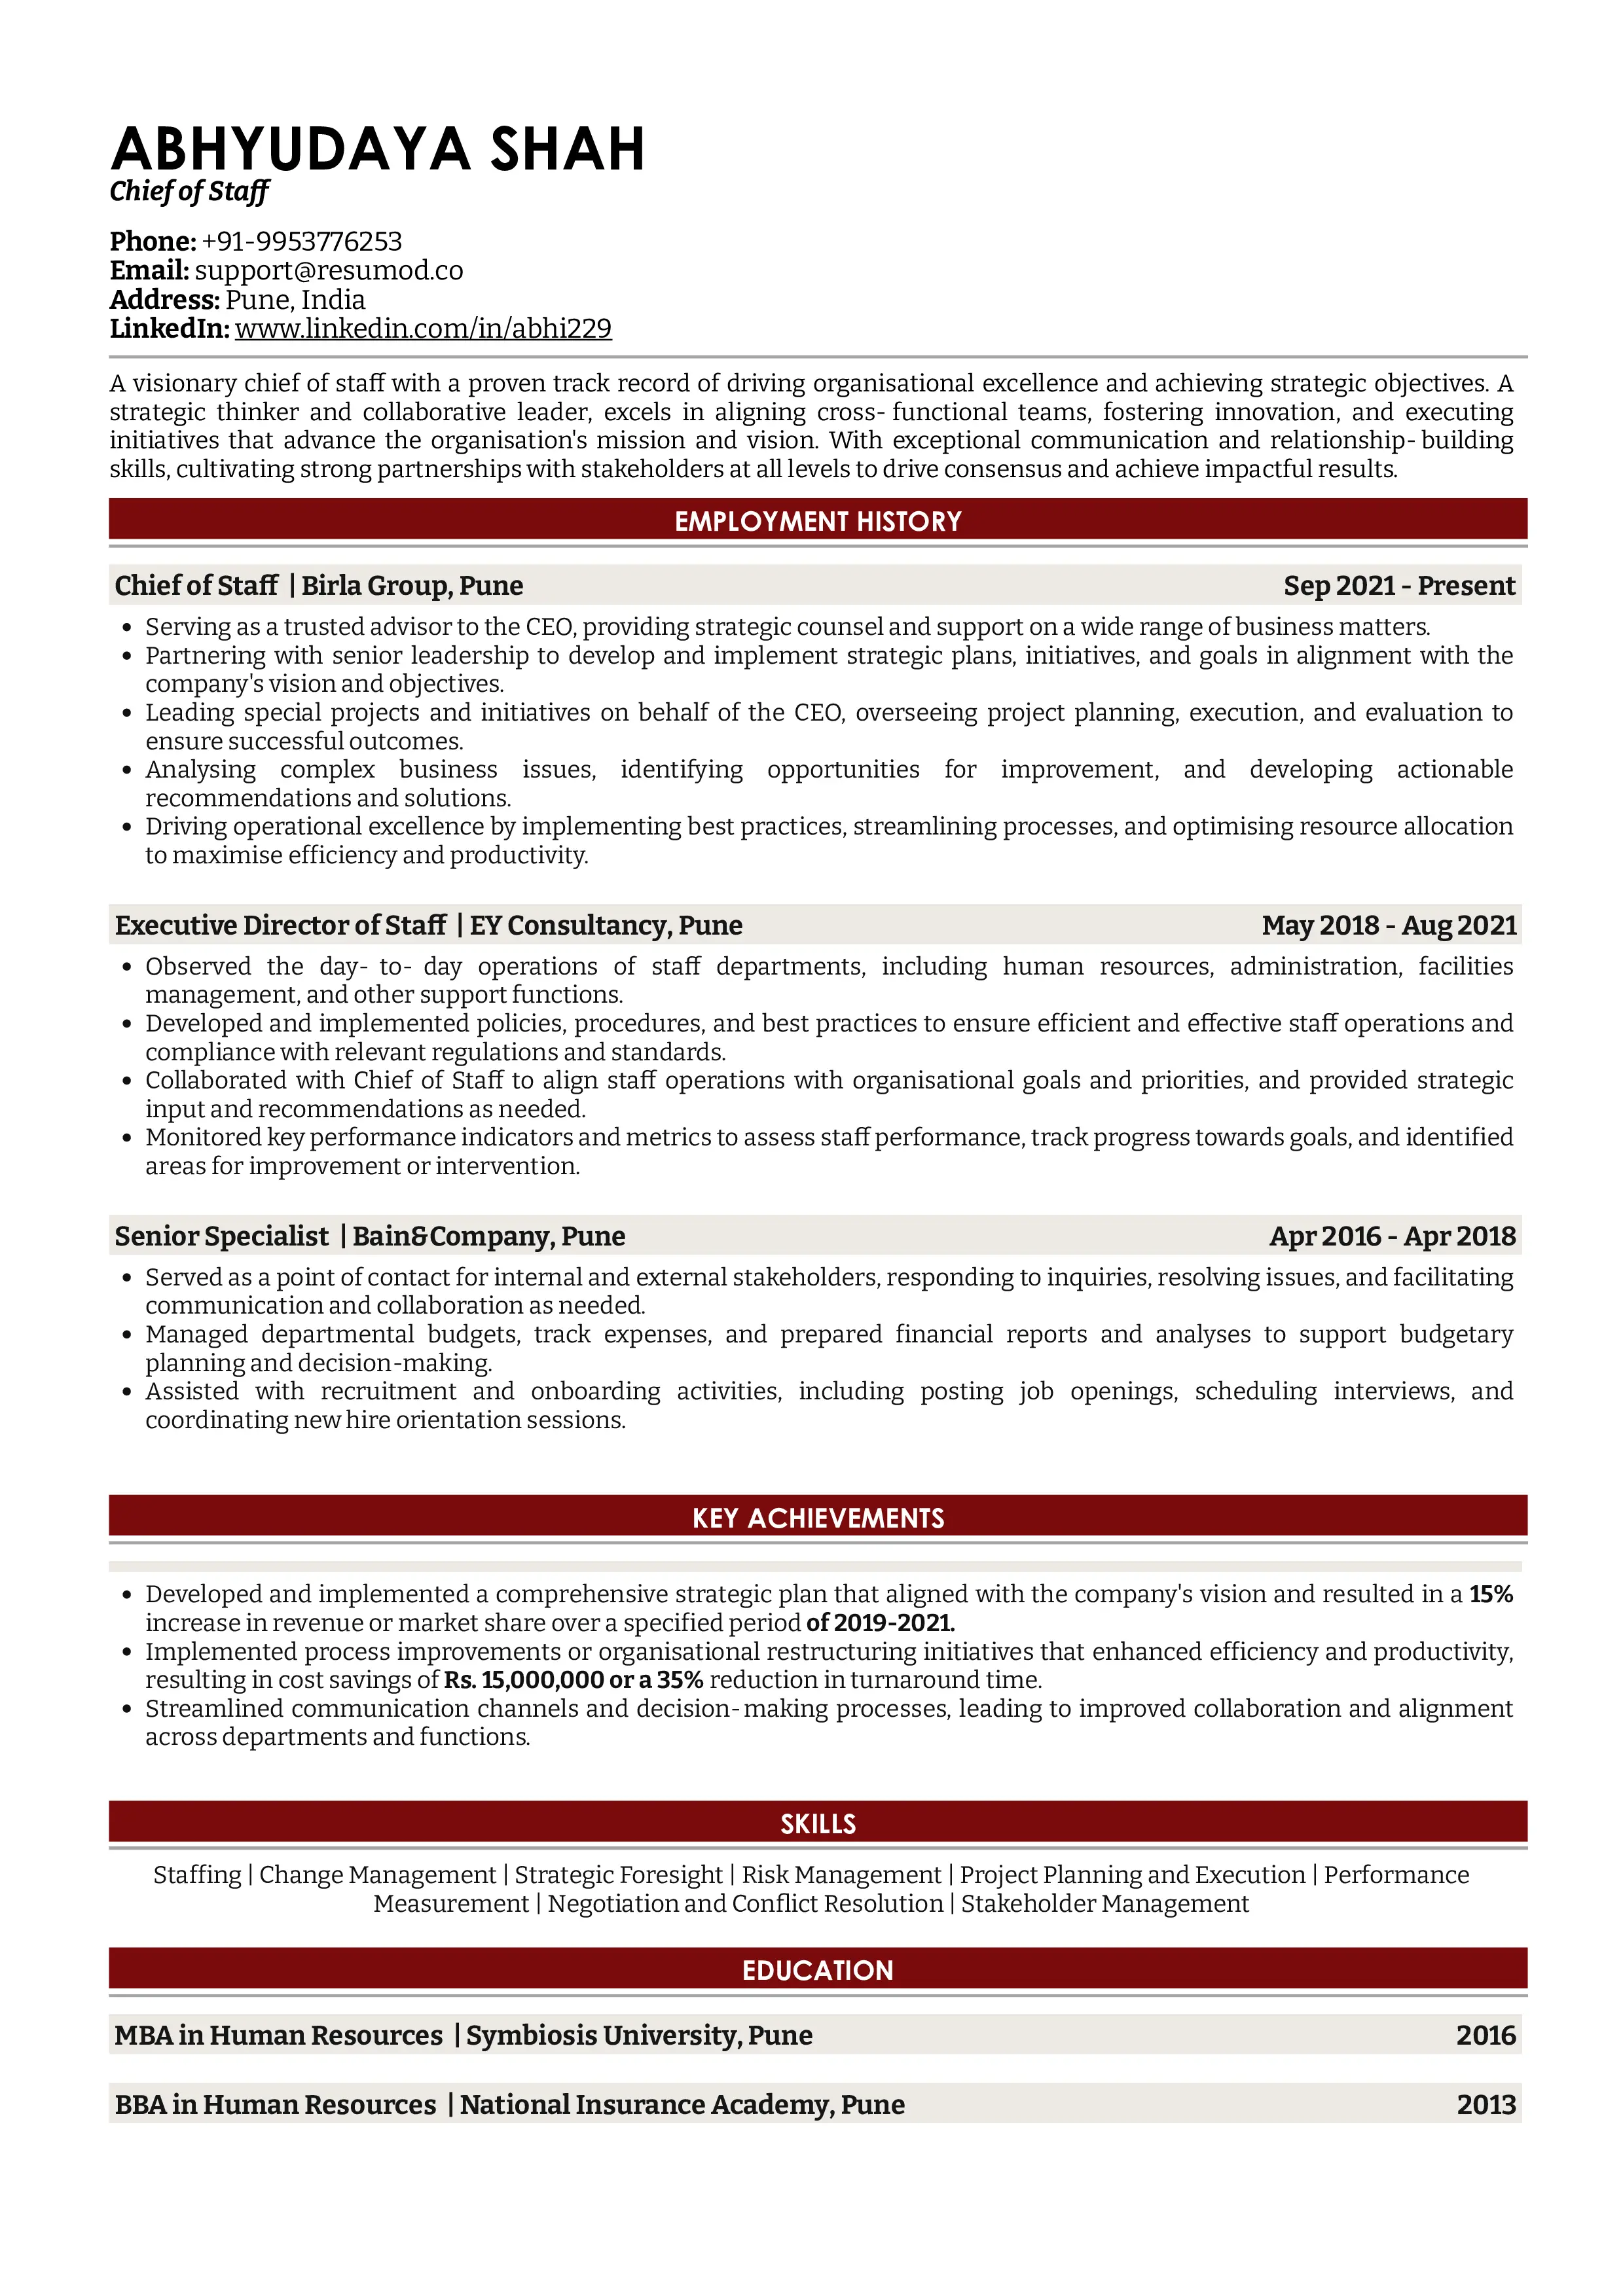 Sample Resume of Chief of Staff | Free Resume Templates & Samples on Resumod.co